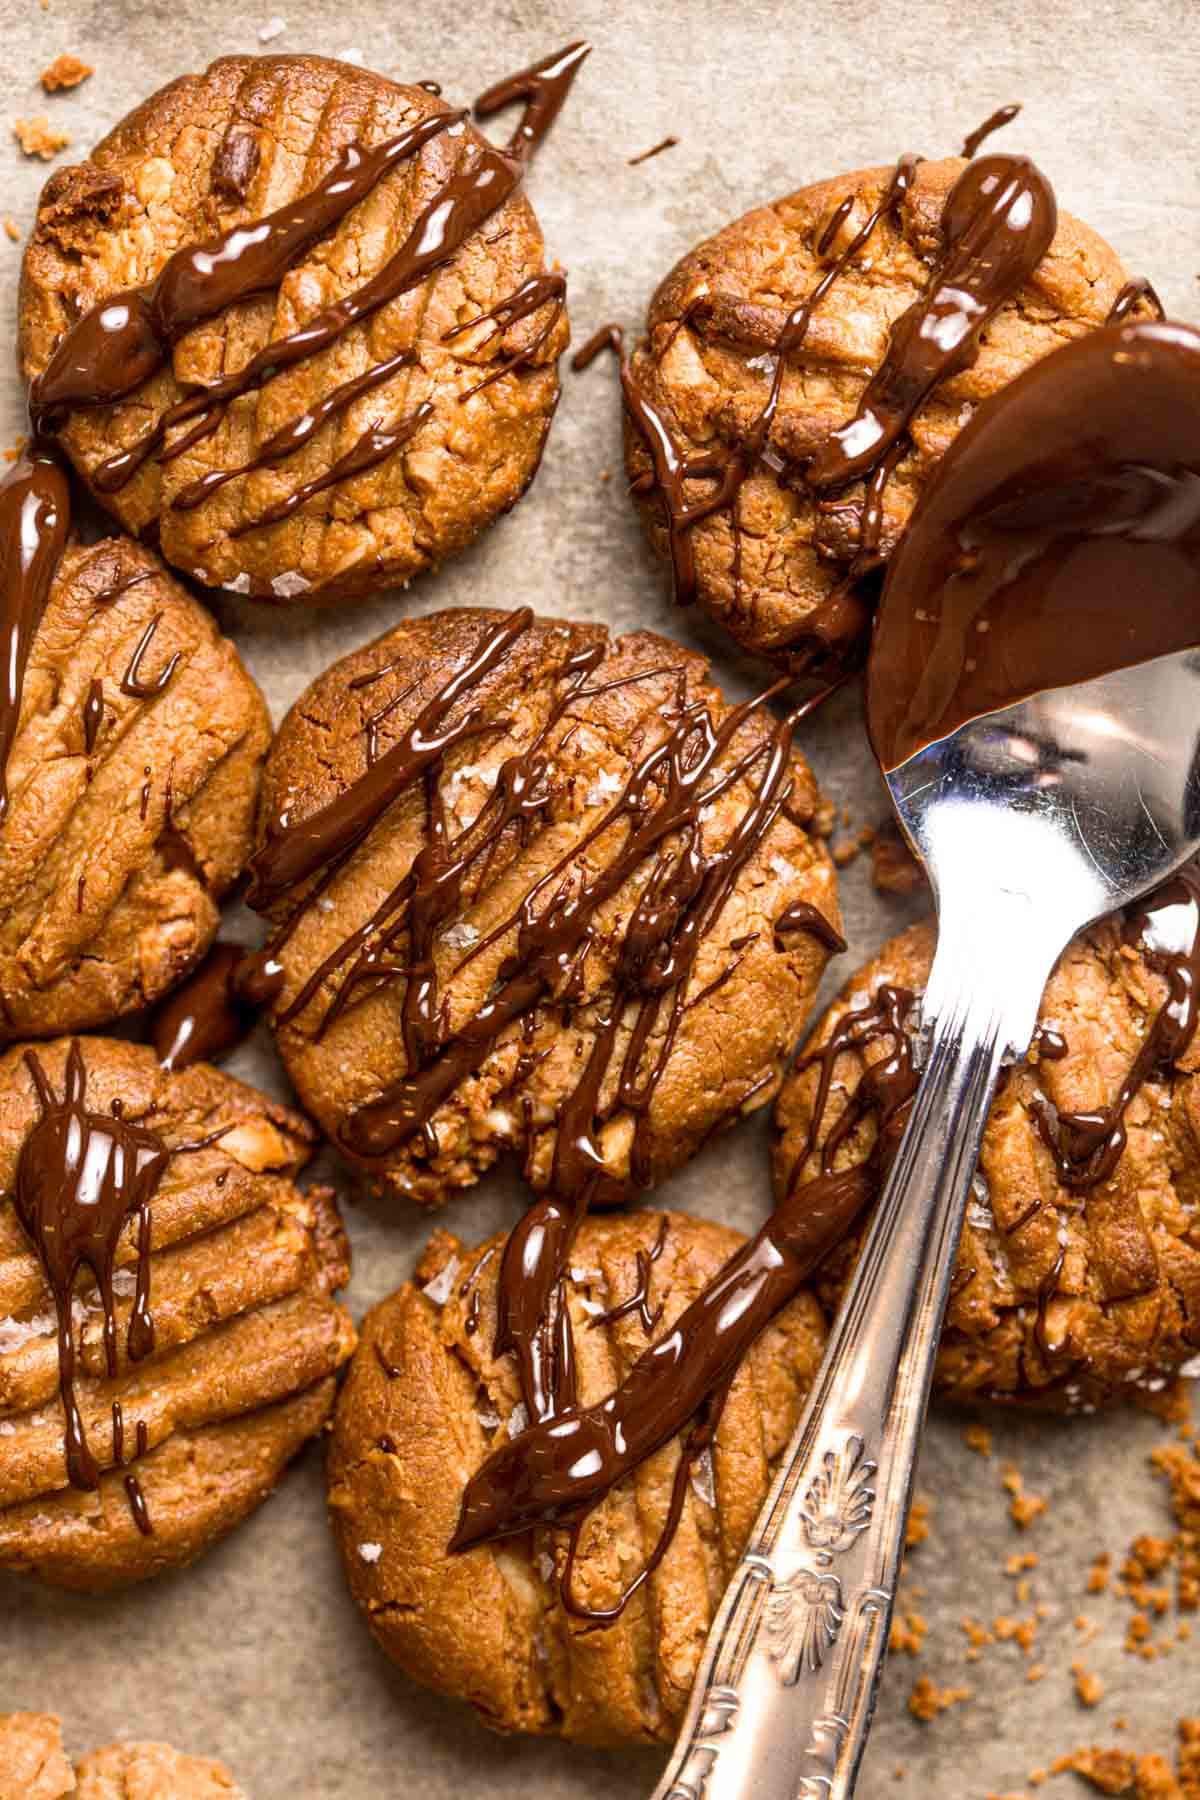 Cookies with melted chocolate drizzled on top.